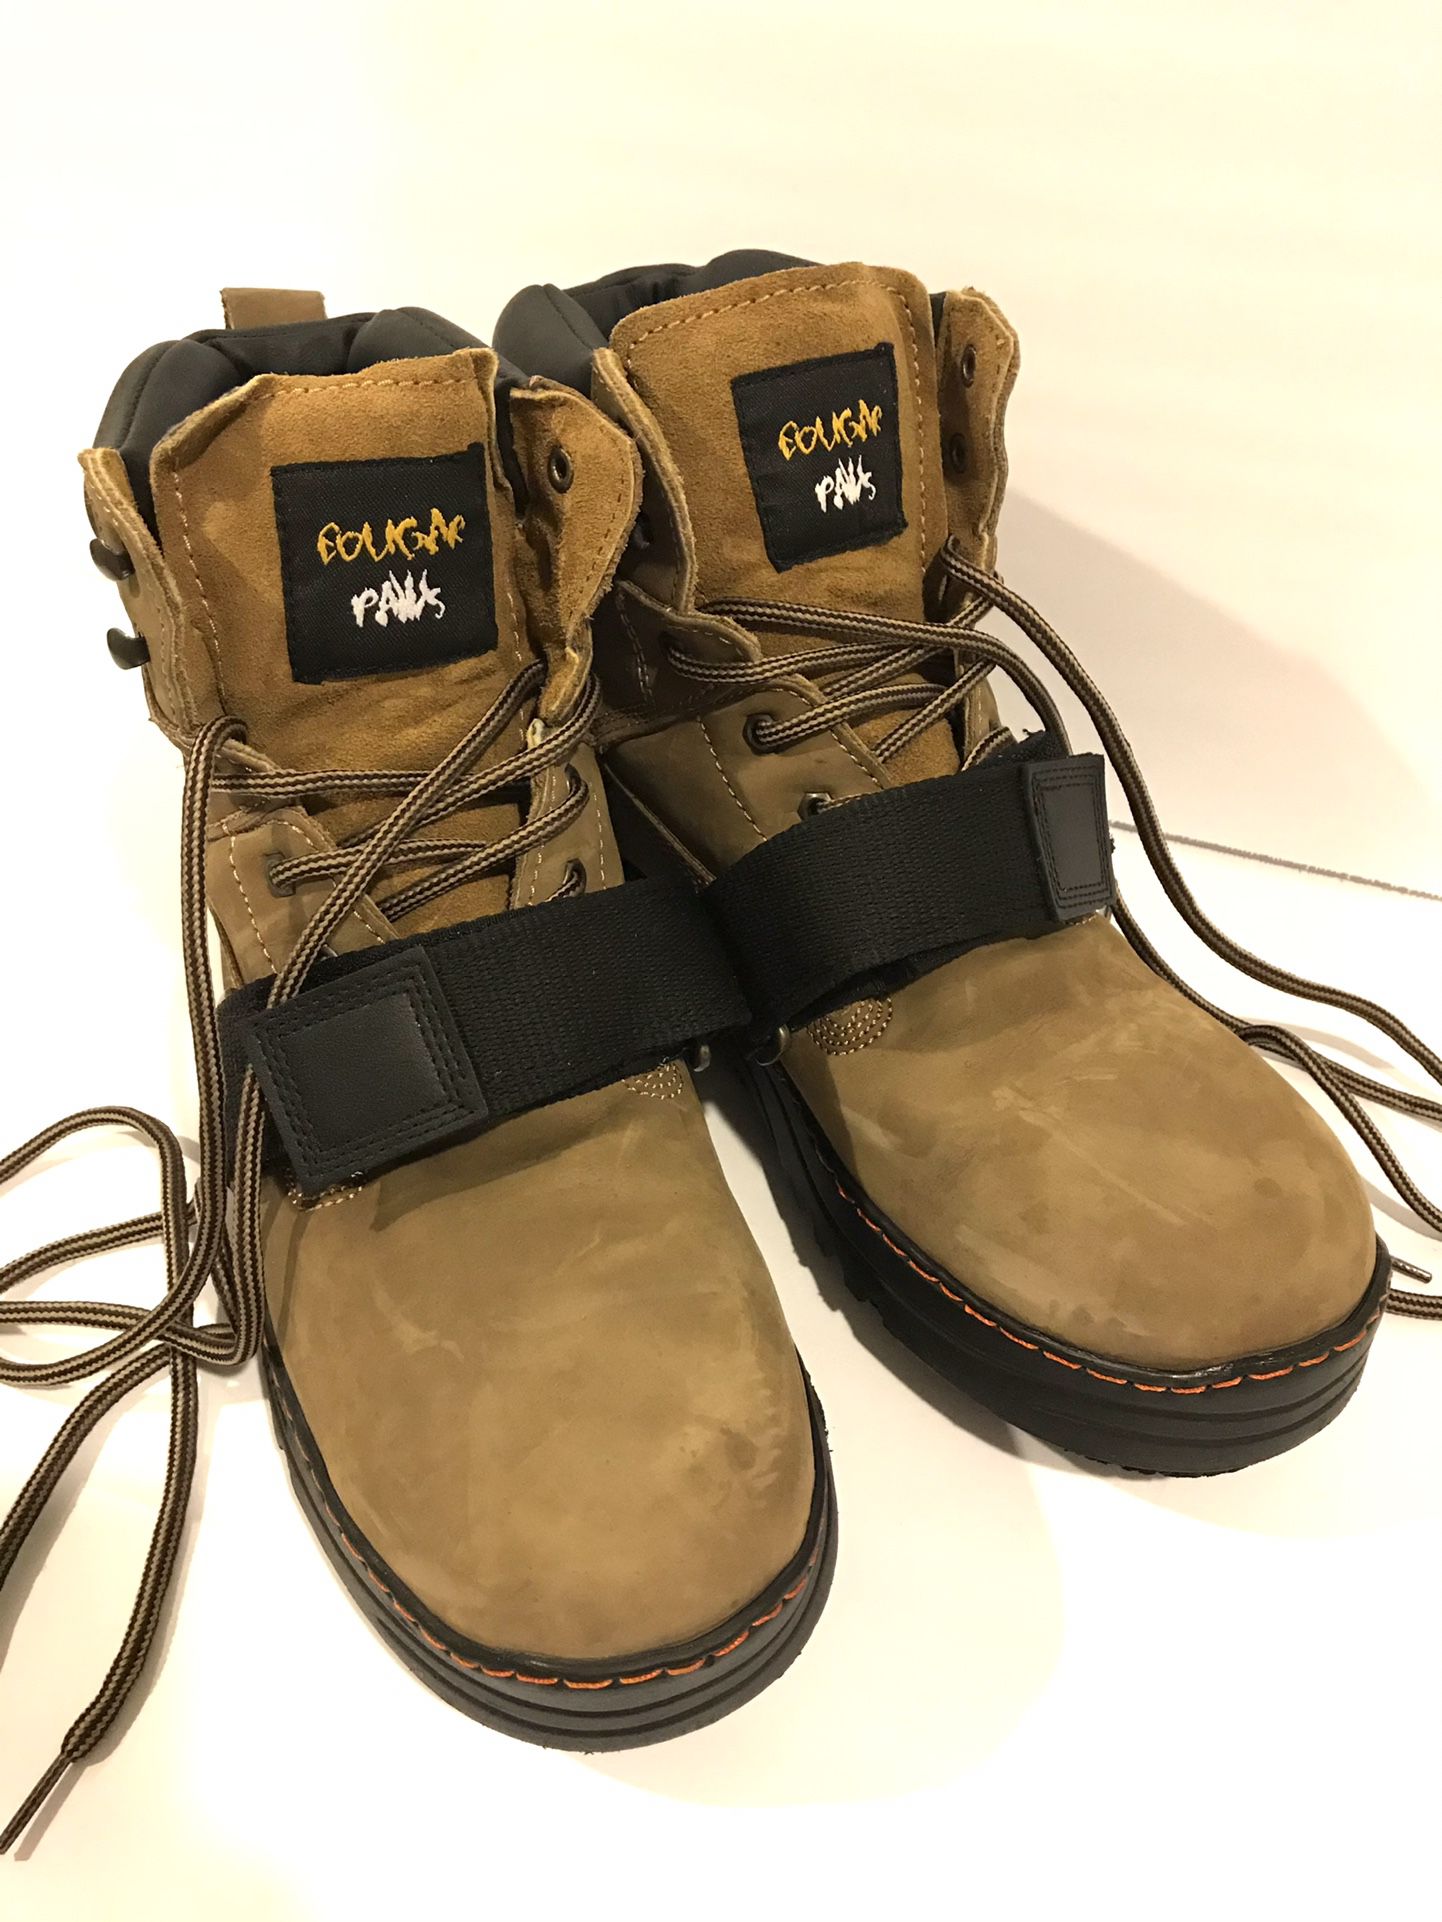 Cougar Paws Roofing Boots Sz 11.5